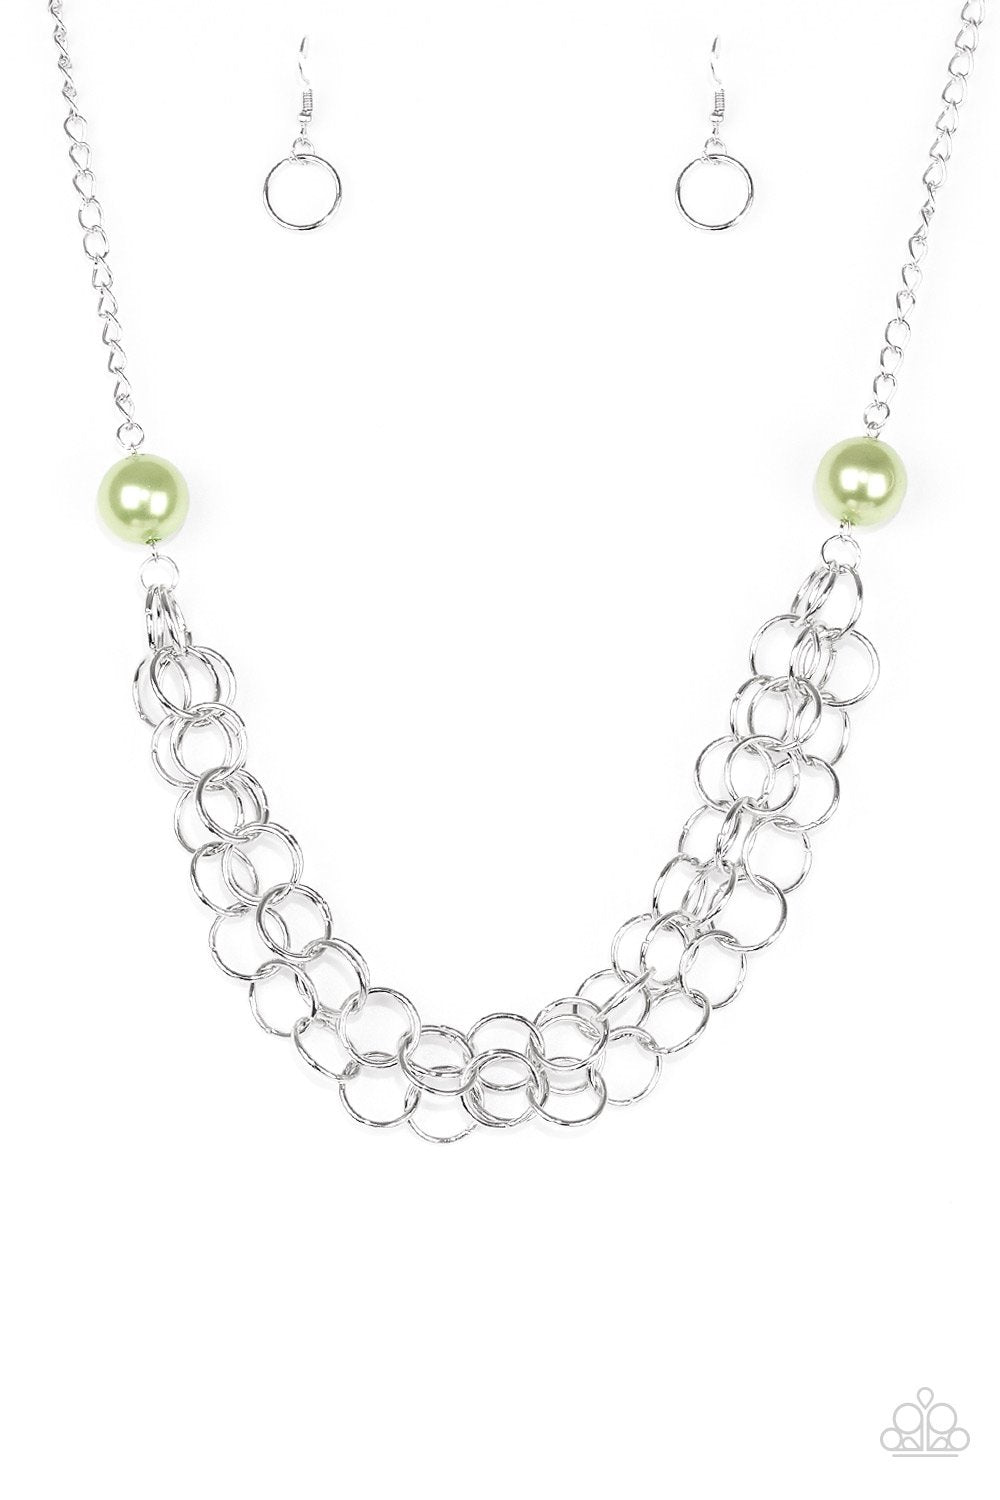 Daring Diva Green and Silver Necklace - Paparazzi Accessories - lightbox -CarasShop.com - $5 Jewelry by Cara Jewels